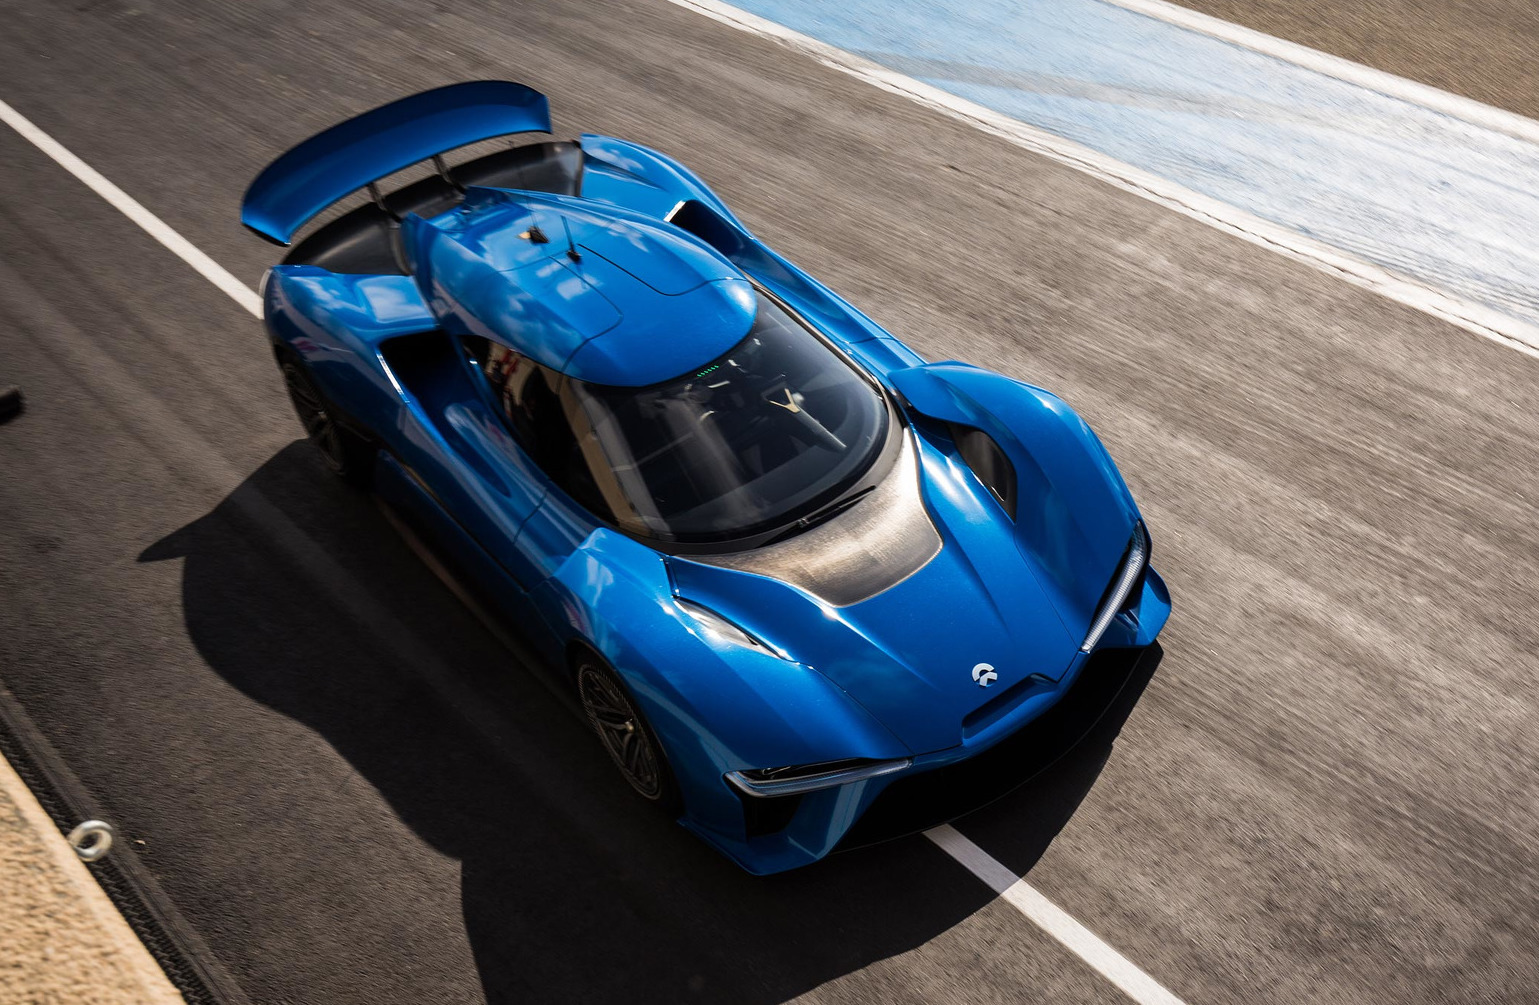 NextEV NIO EP9 is China’s latest electric supercar, 1000kW (video)